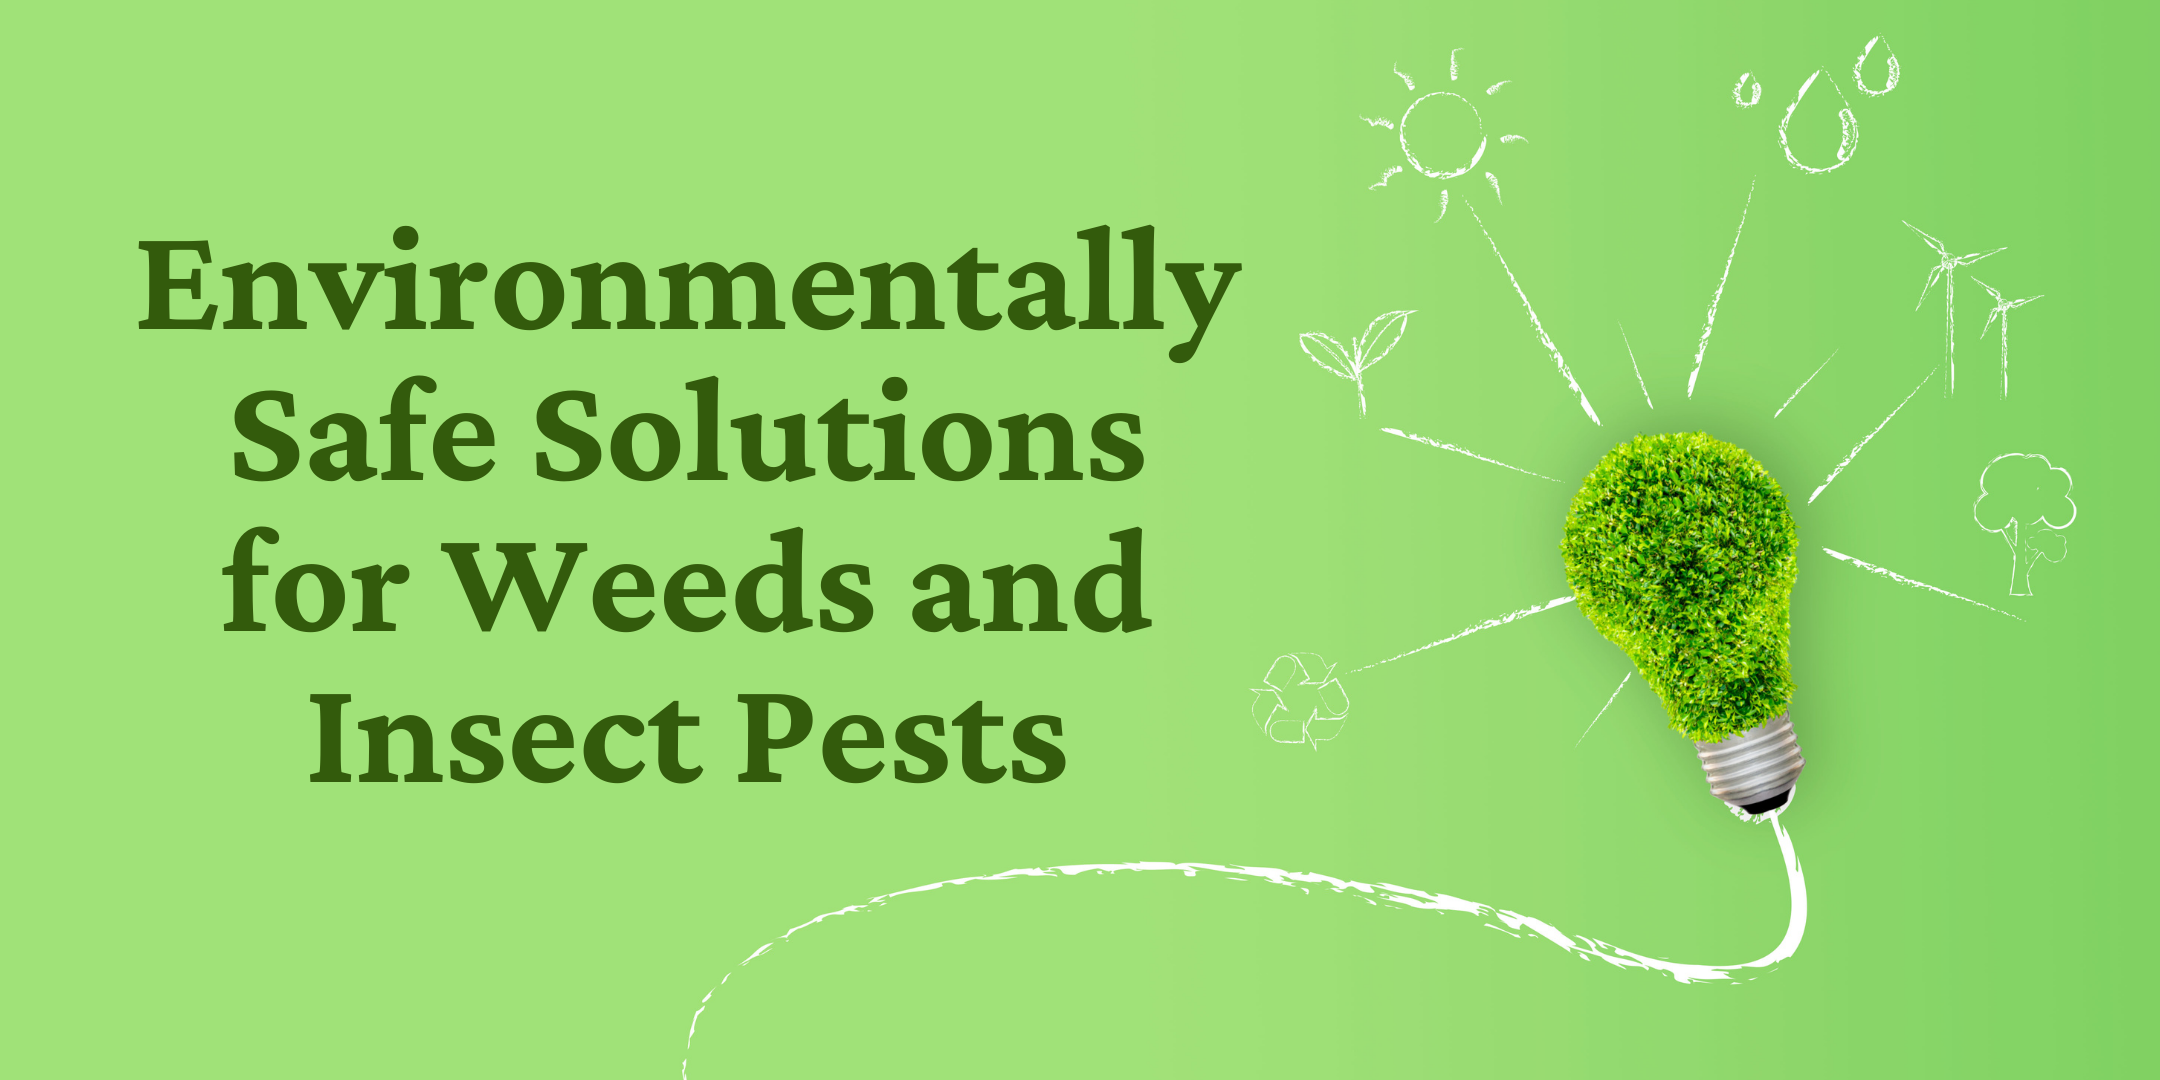 Environmentally Safe Solutions for Weeds and Insect Pests